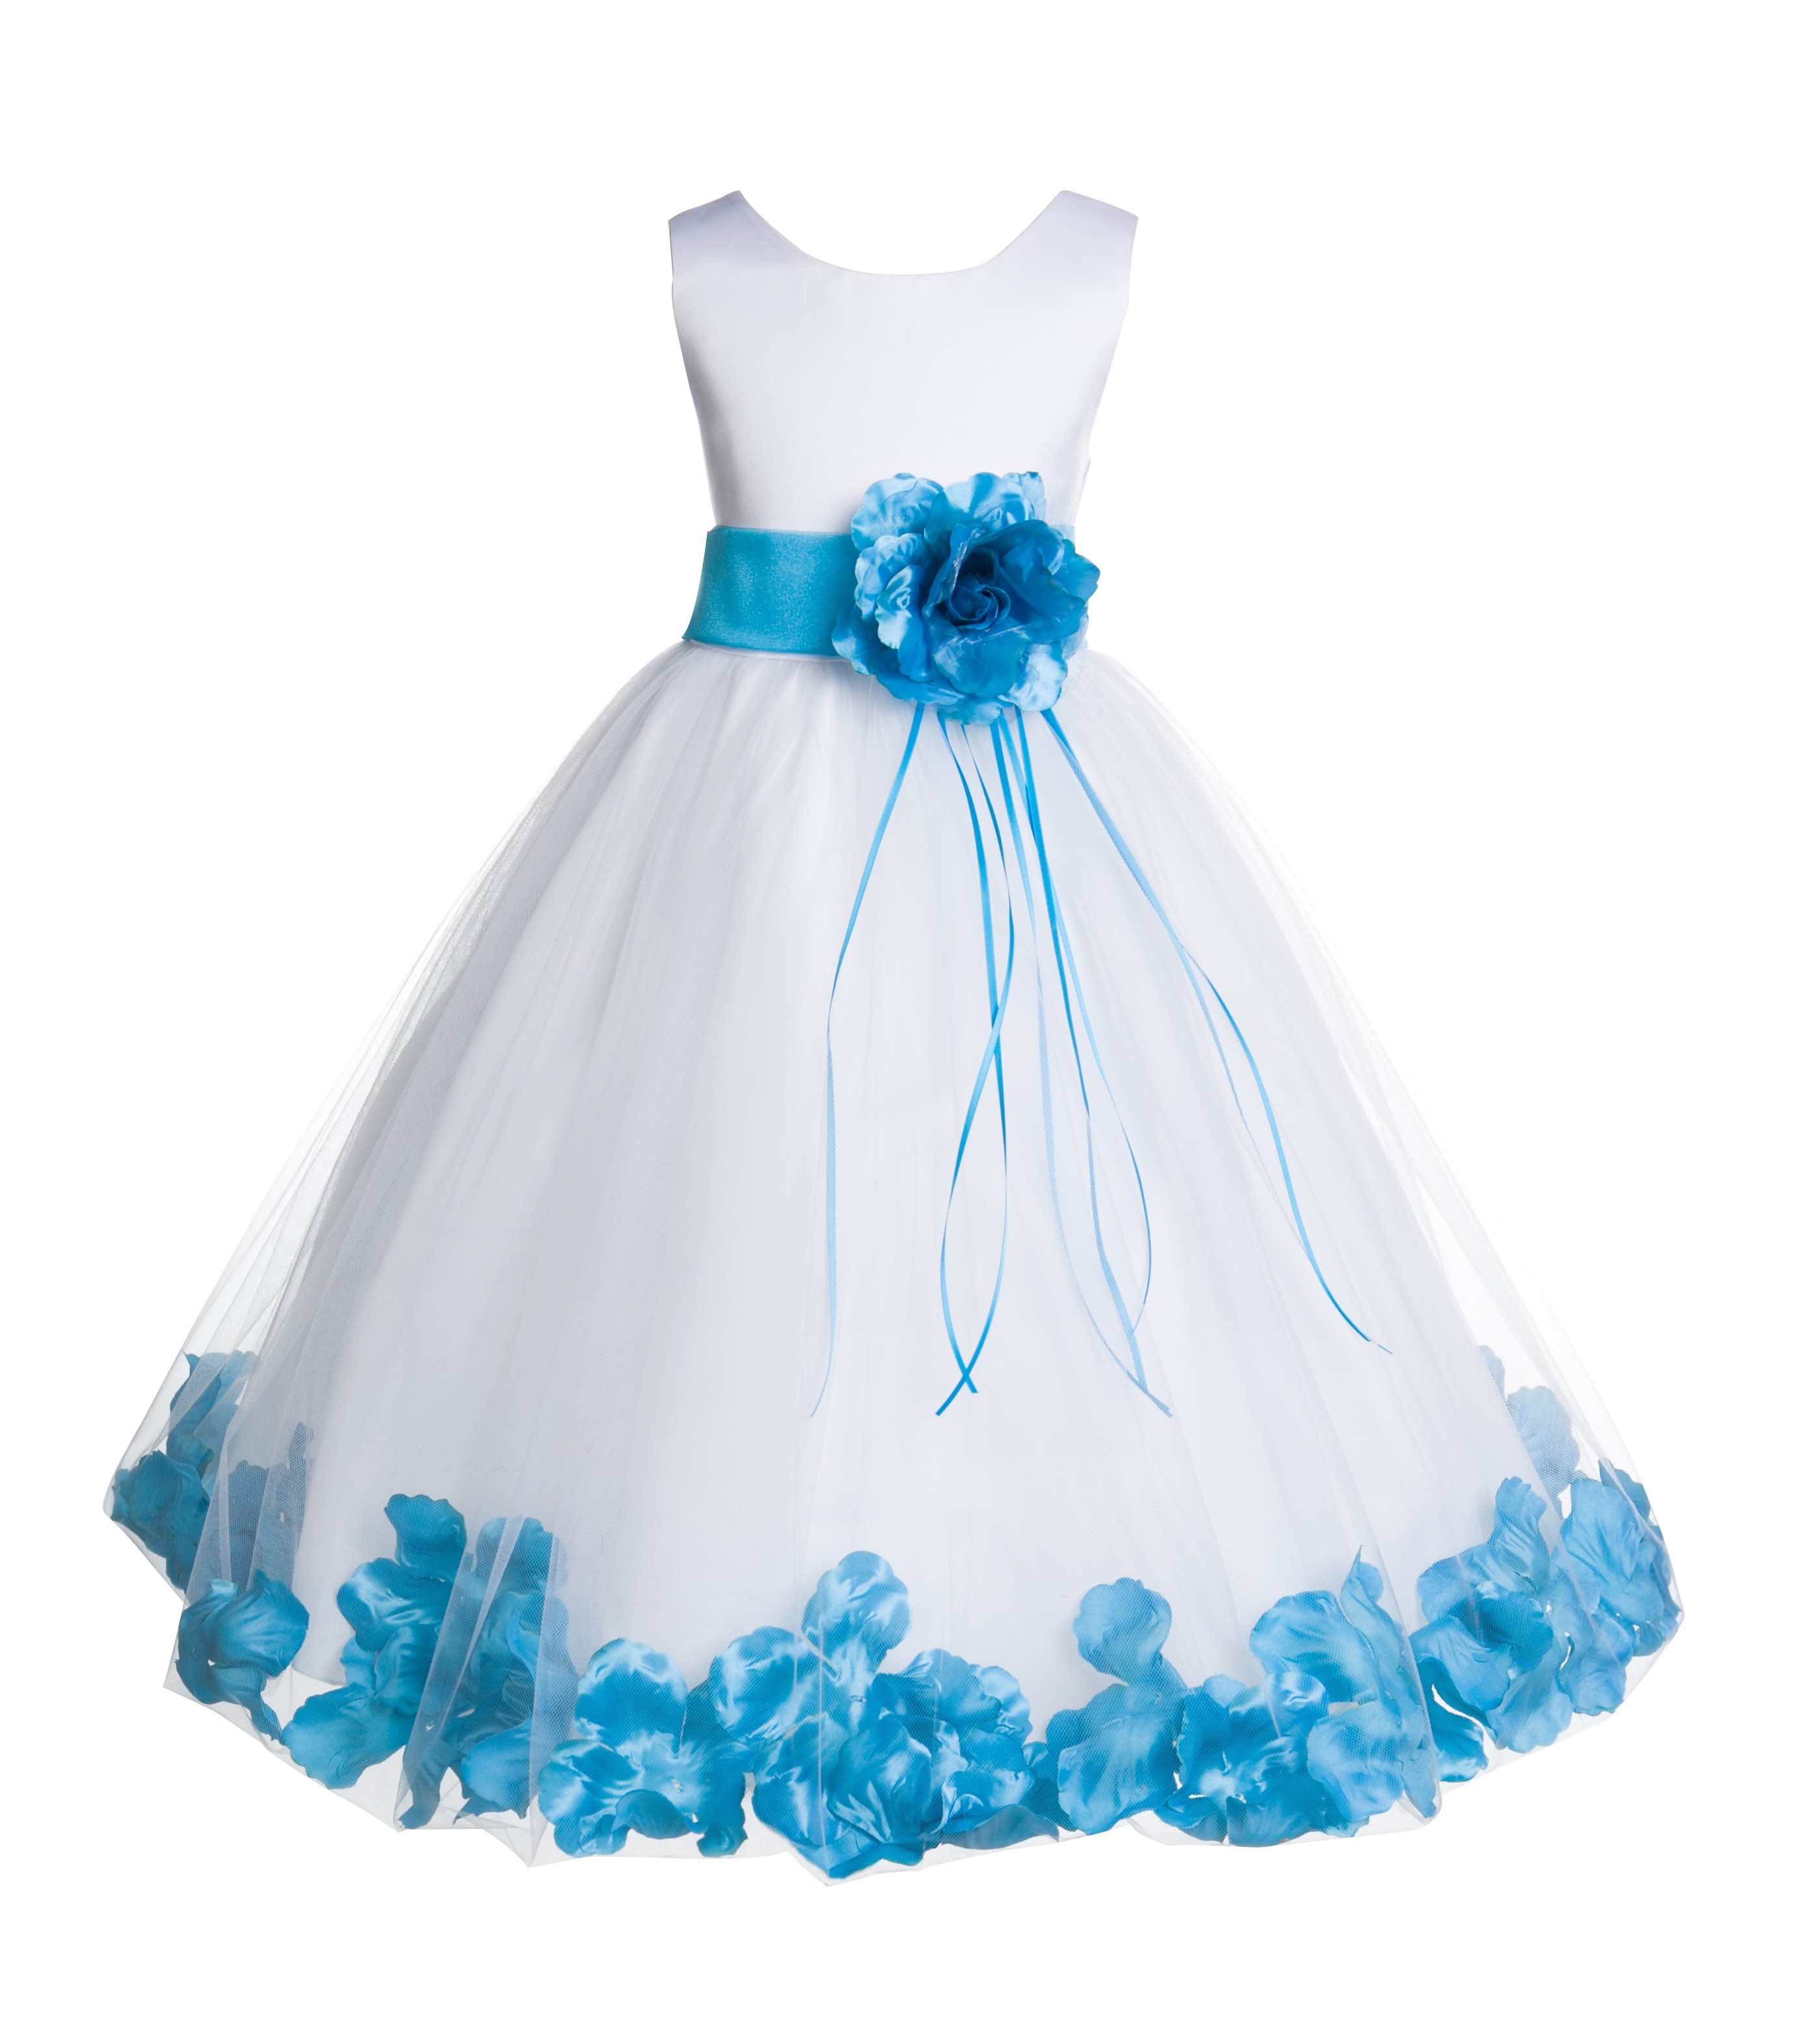 White/Turquoise Floral Rose Petals Tulle Flower Girl Dress 007